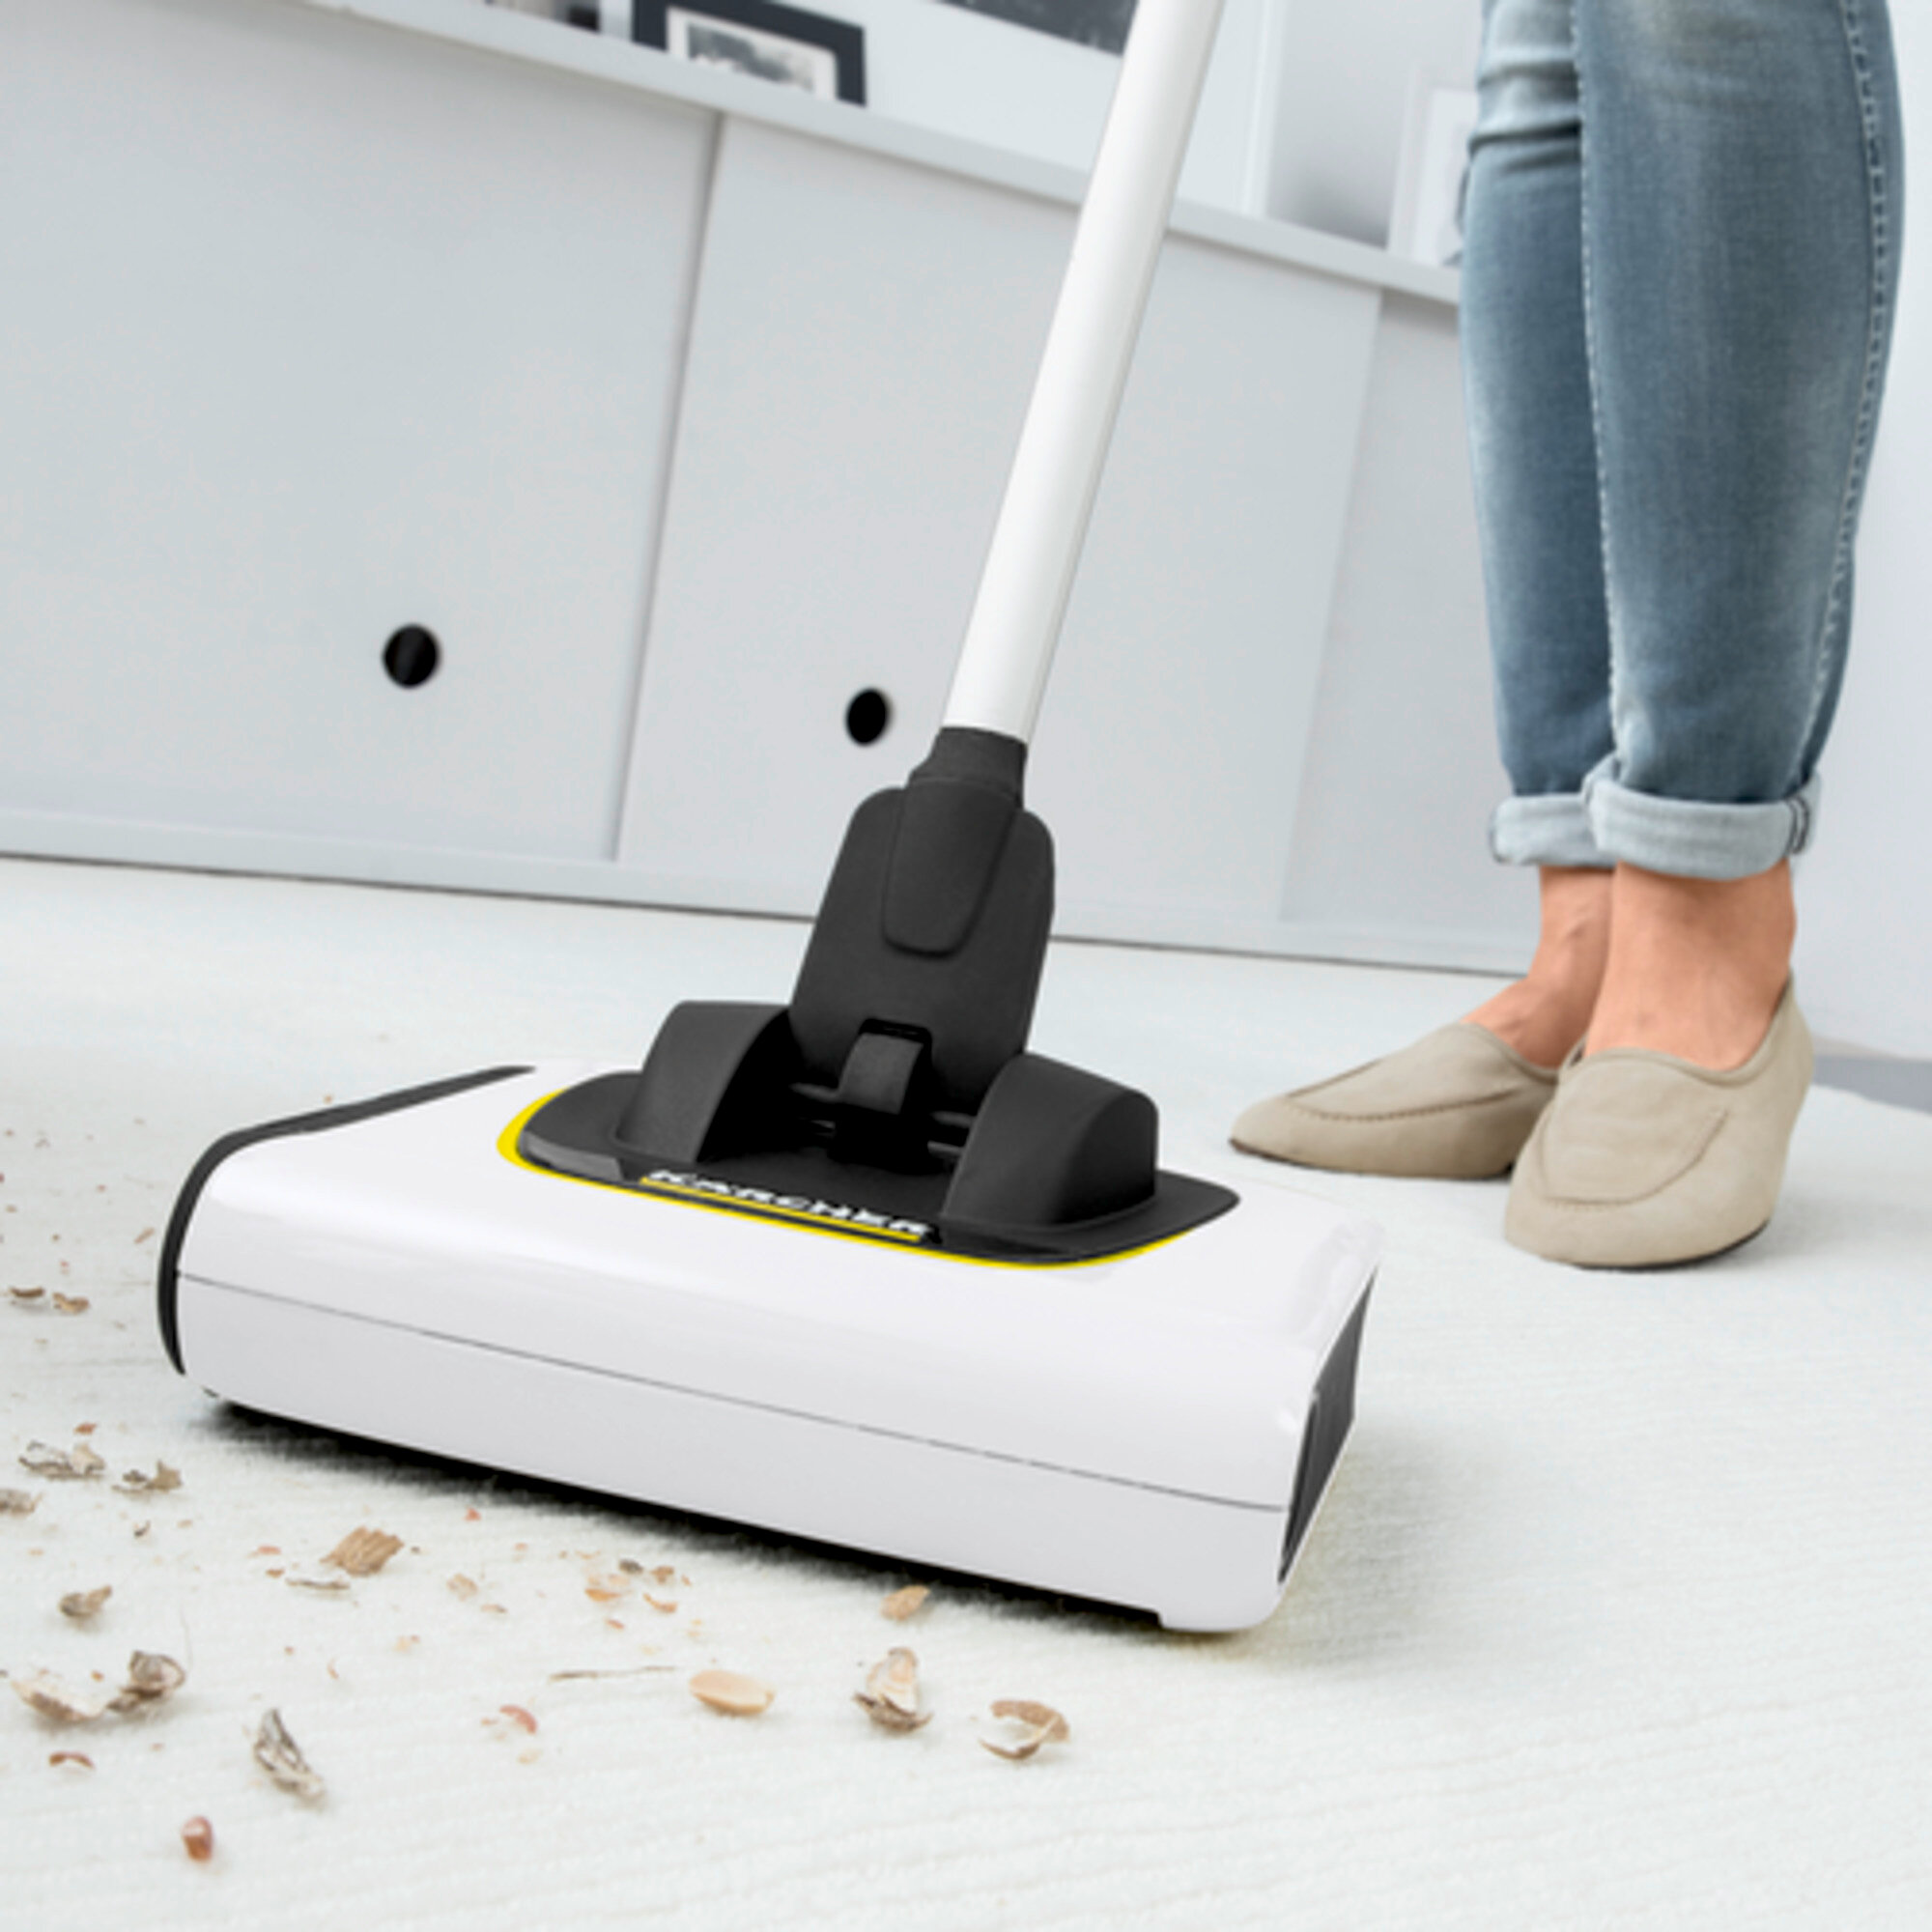 Karcher adaptive cleaning system